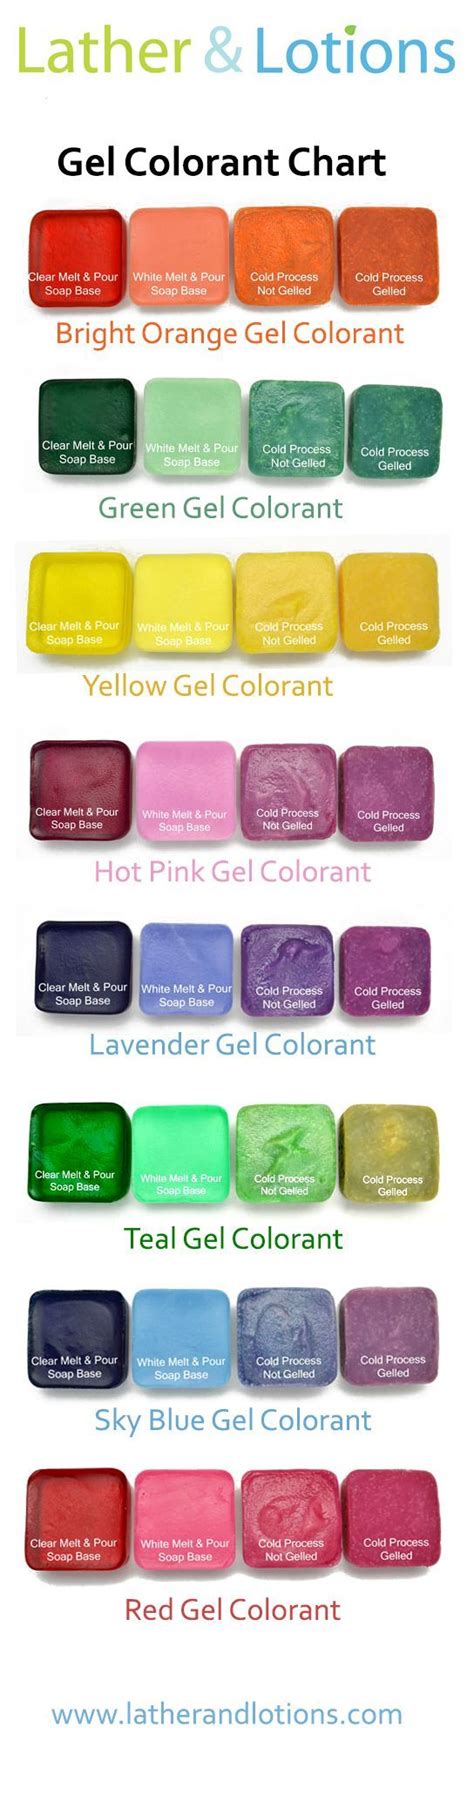 Use Our Soap Colorant Chart To Determine The Best Colorant For Your